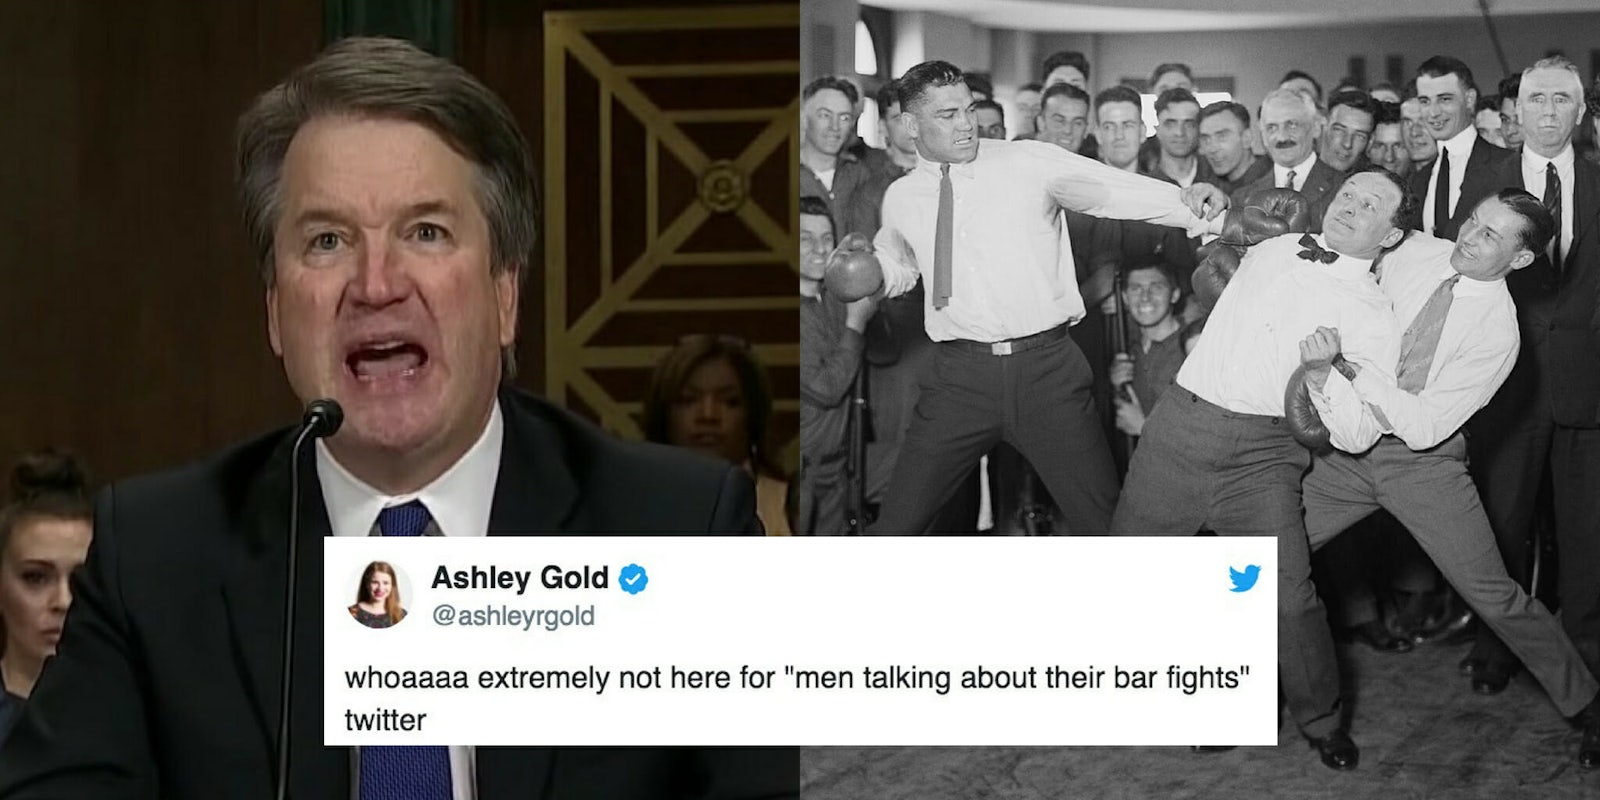 People can't stop tweeting about their Kavanaugh-style bar fights